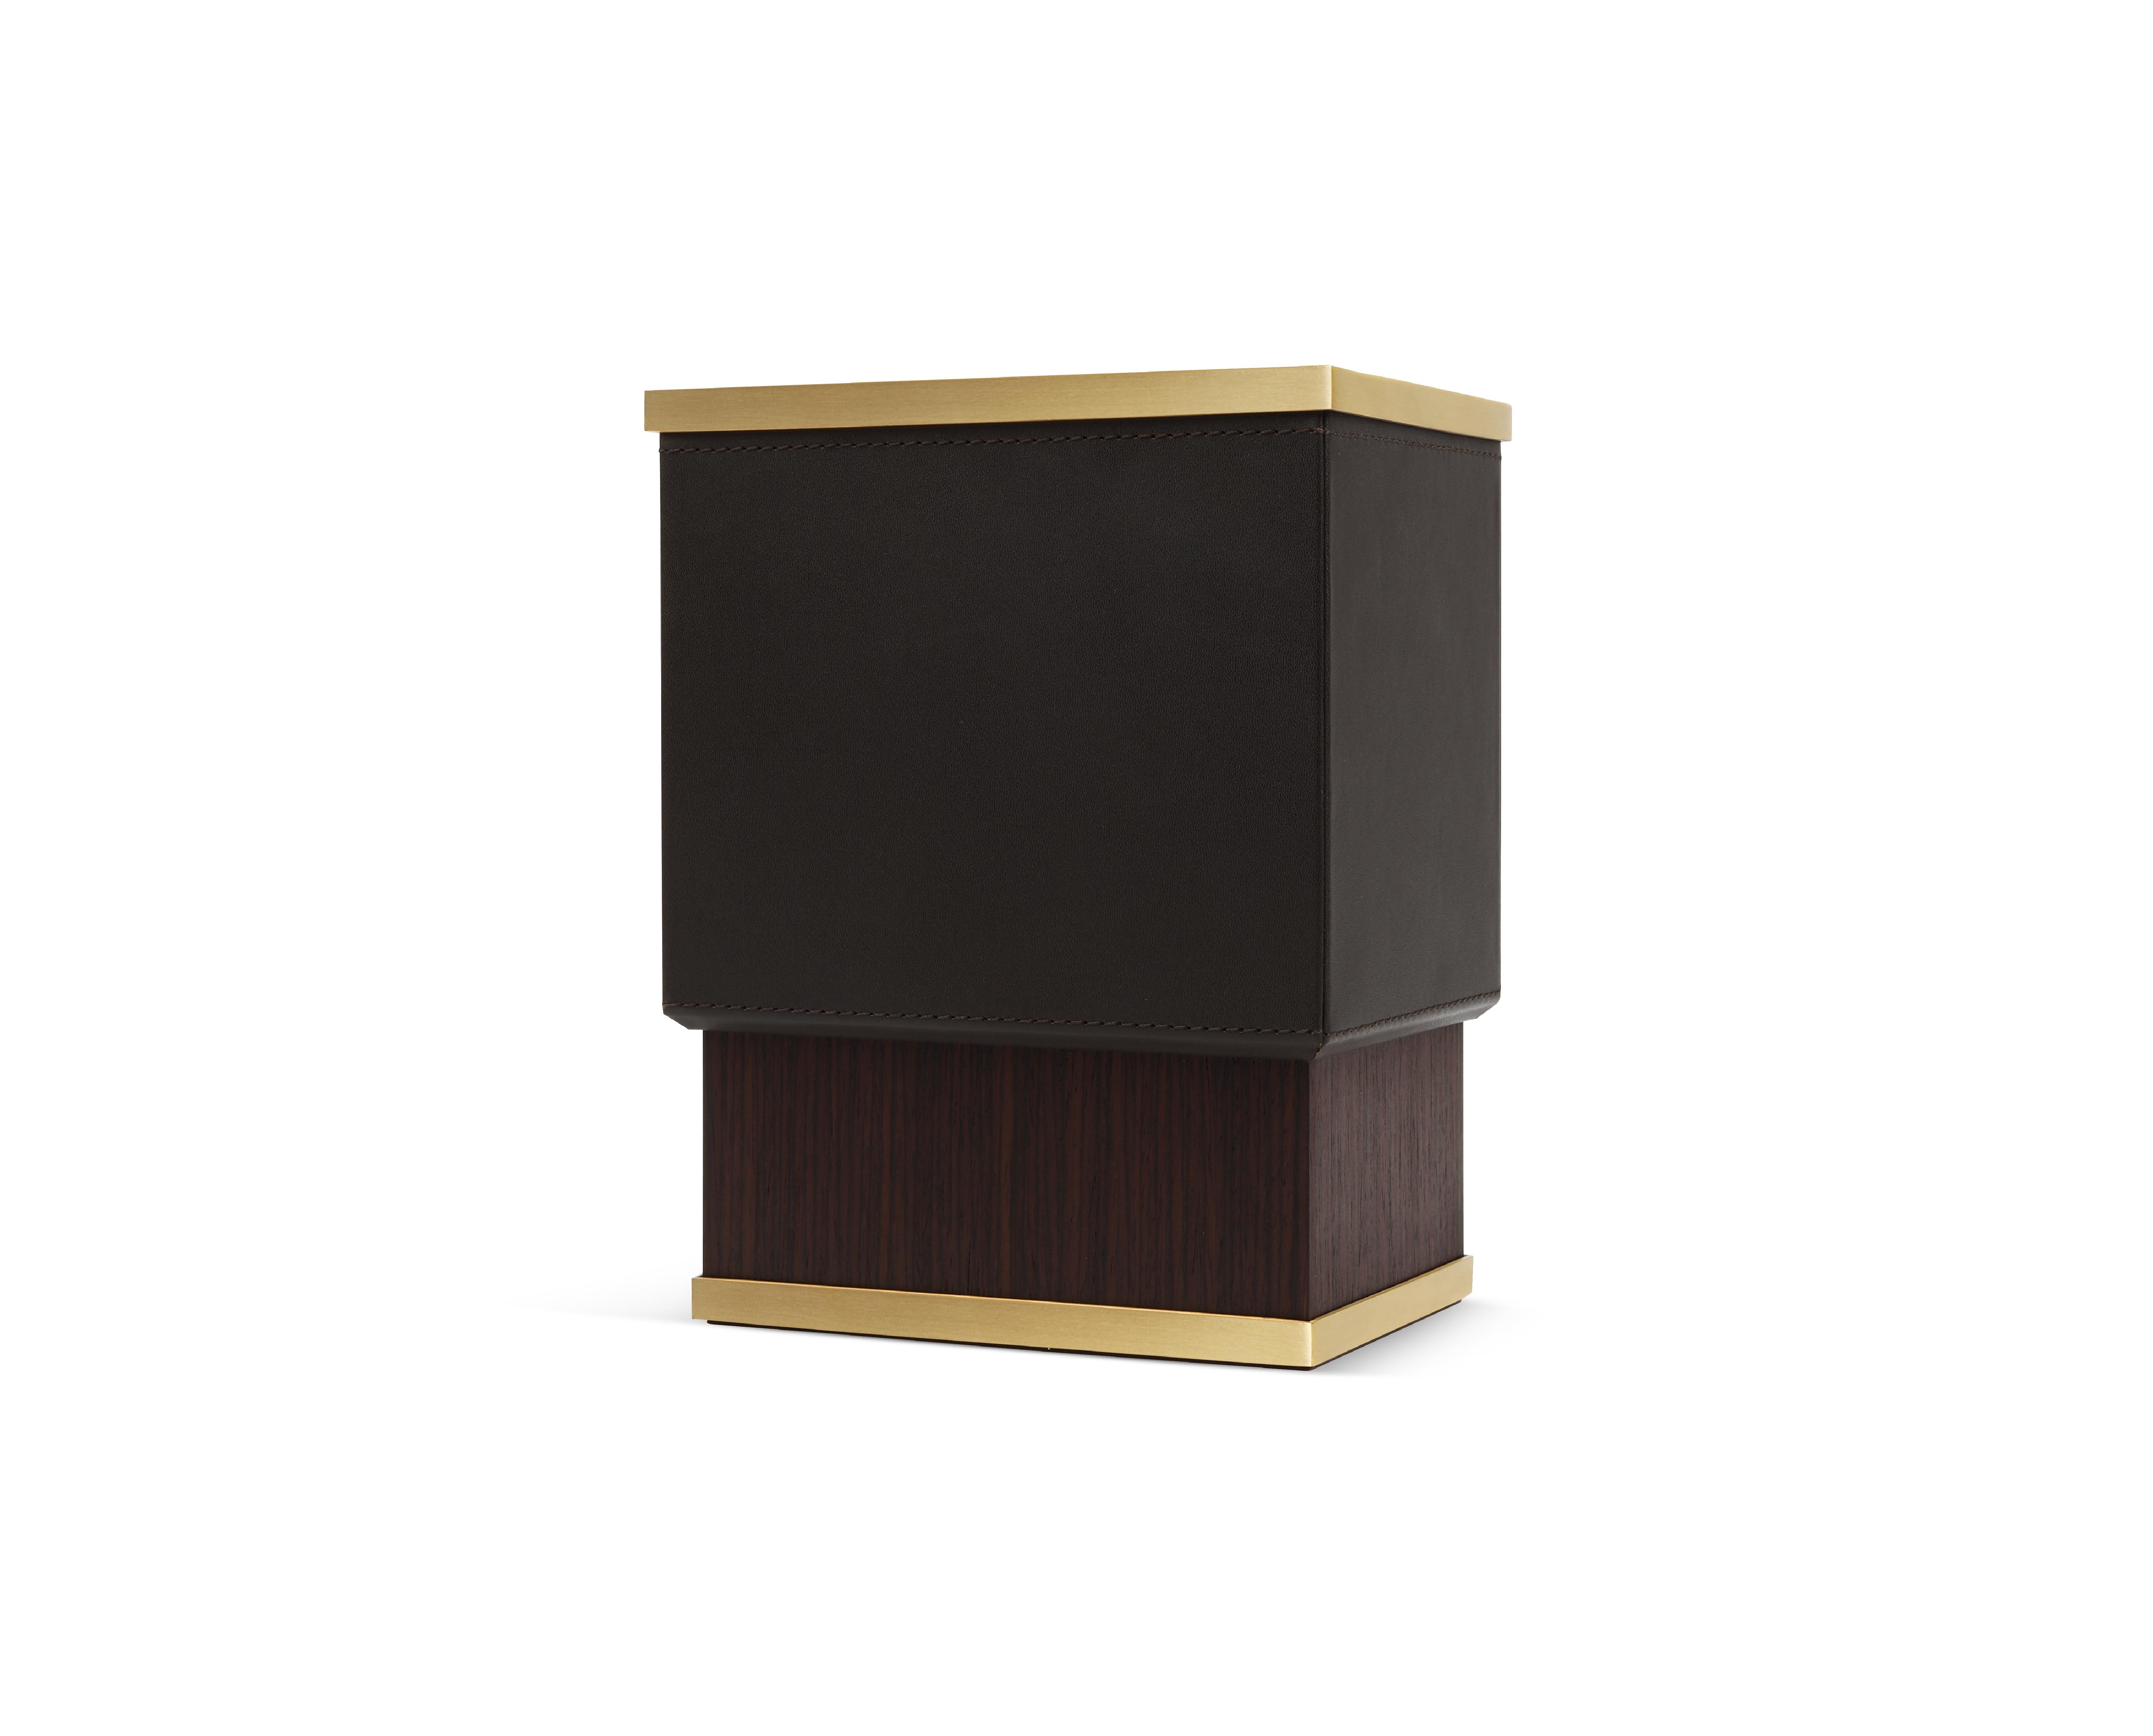 Devon bookend by Madheke
Dimensions: D 11.2 x W 16.2 x H 21.2 cm.
Materials: Leather, wood, metal.

Encased leather booked with internal compartments.

Reflecting the finest in craftsmanship, innovation and heritage, Madheke creates tailored